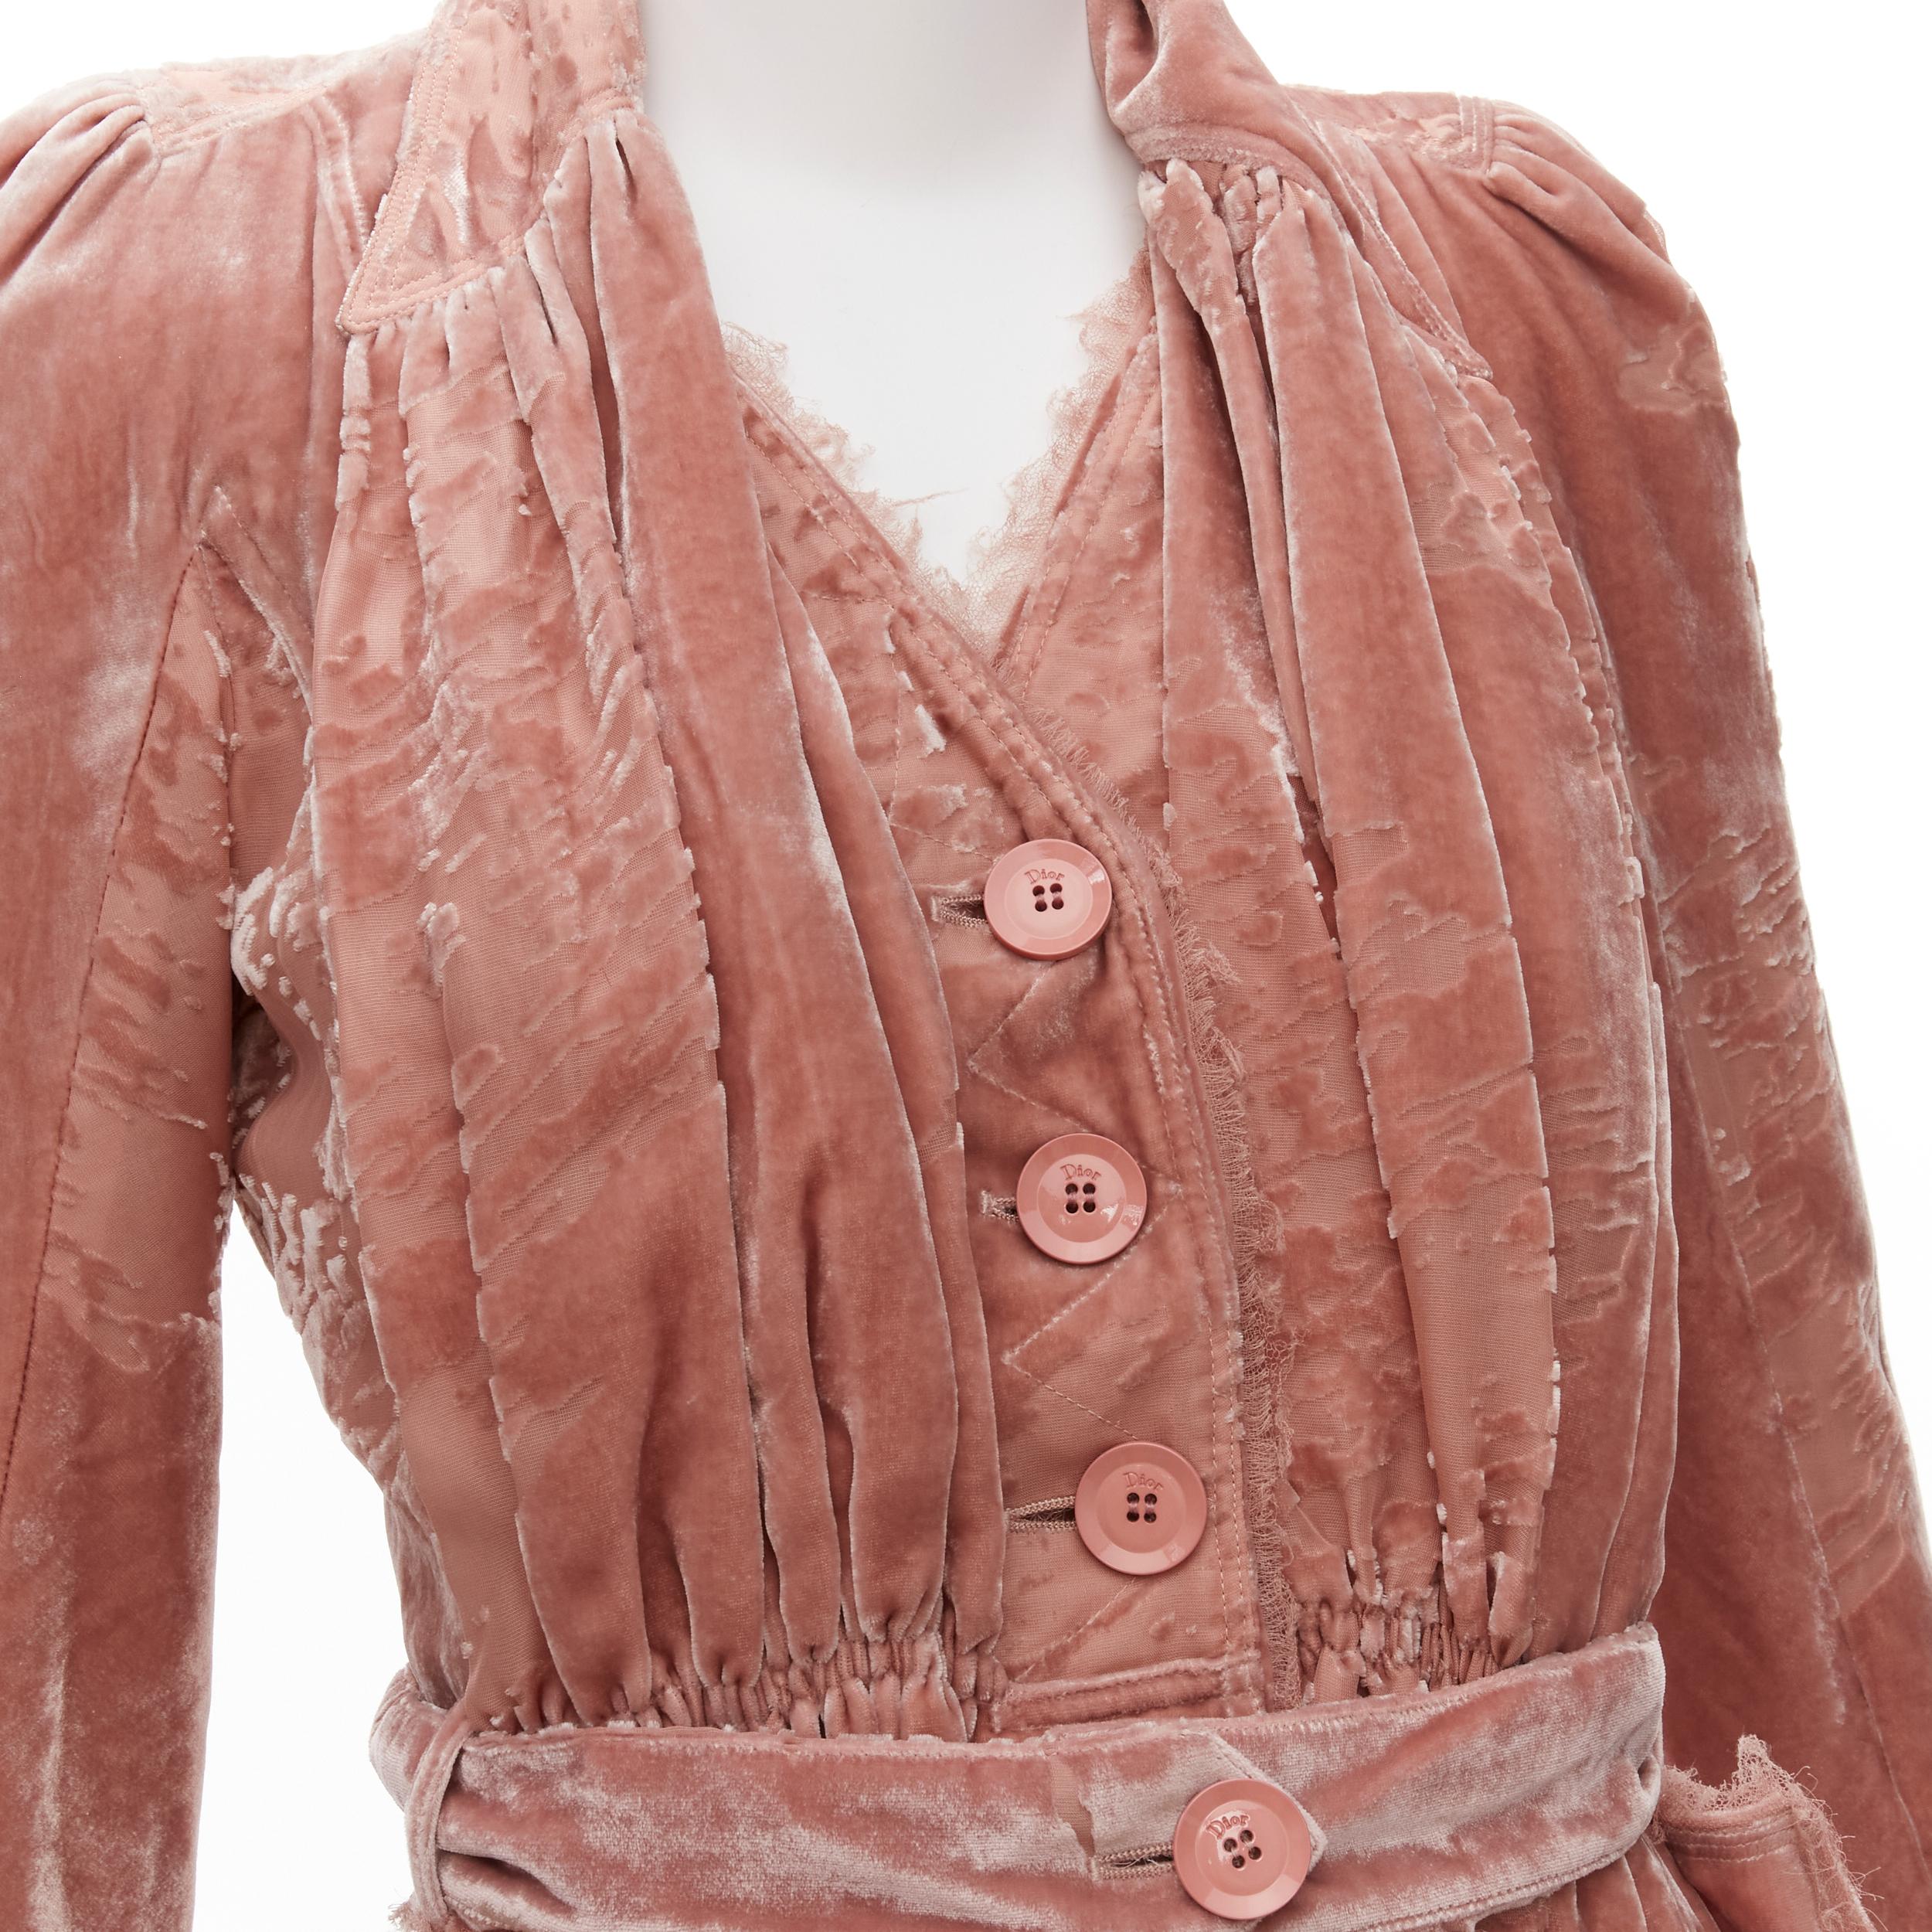 CHRISTIAN DIOR John Galliano Vintage blush pink devore velvet belted Victorian jacket FR38 M
Reference: TGAS/D00292
Brand: Christian Dior
Designer: John Galliano
Material: Viscose, Silk
Color: Pink
Pattern: Abstract
Closure: Button
Lining: Pink